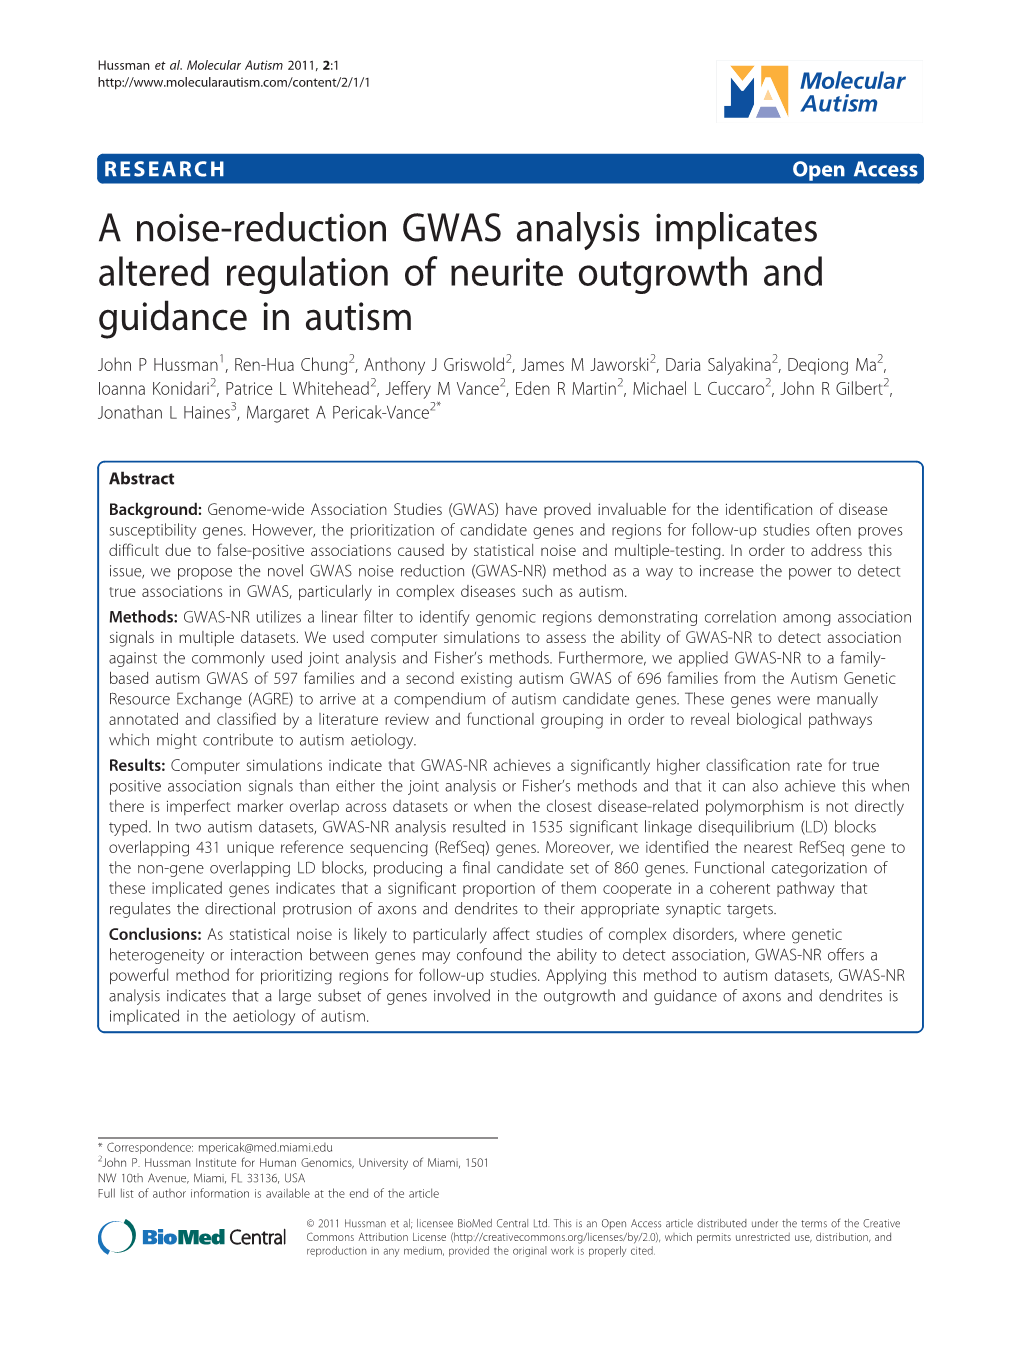 A Noise-Reduction GWAS Analysis Implicates Altered Regulation Of